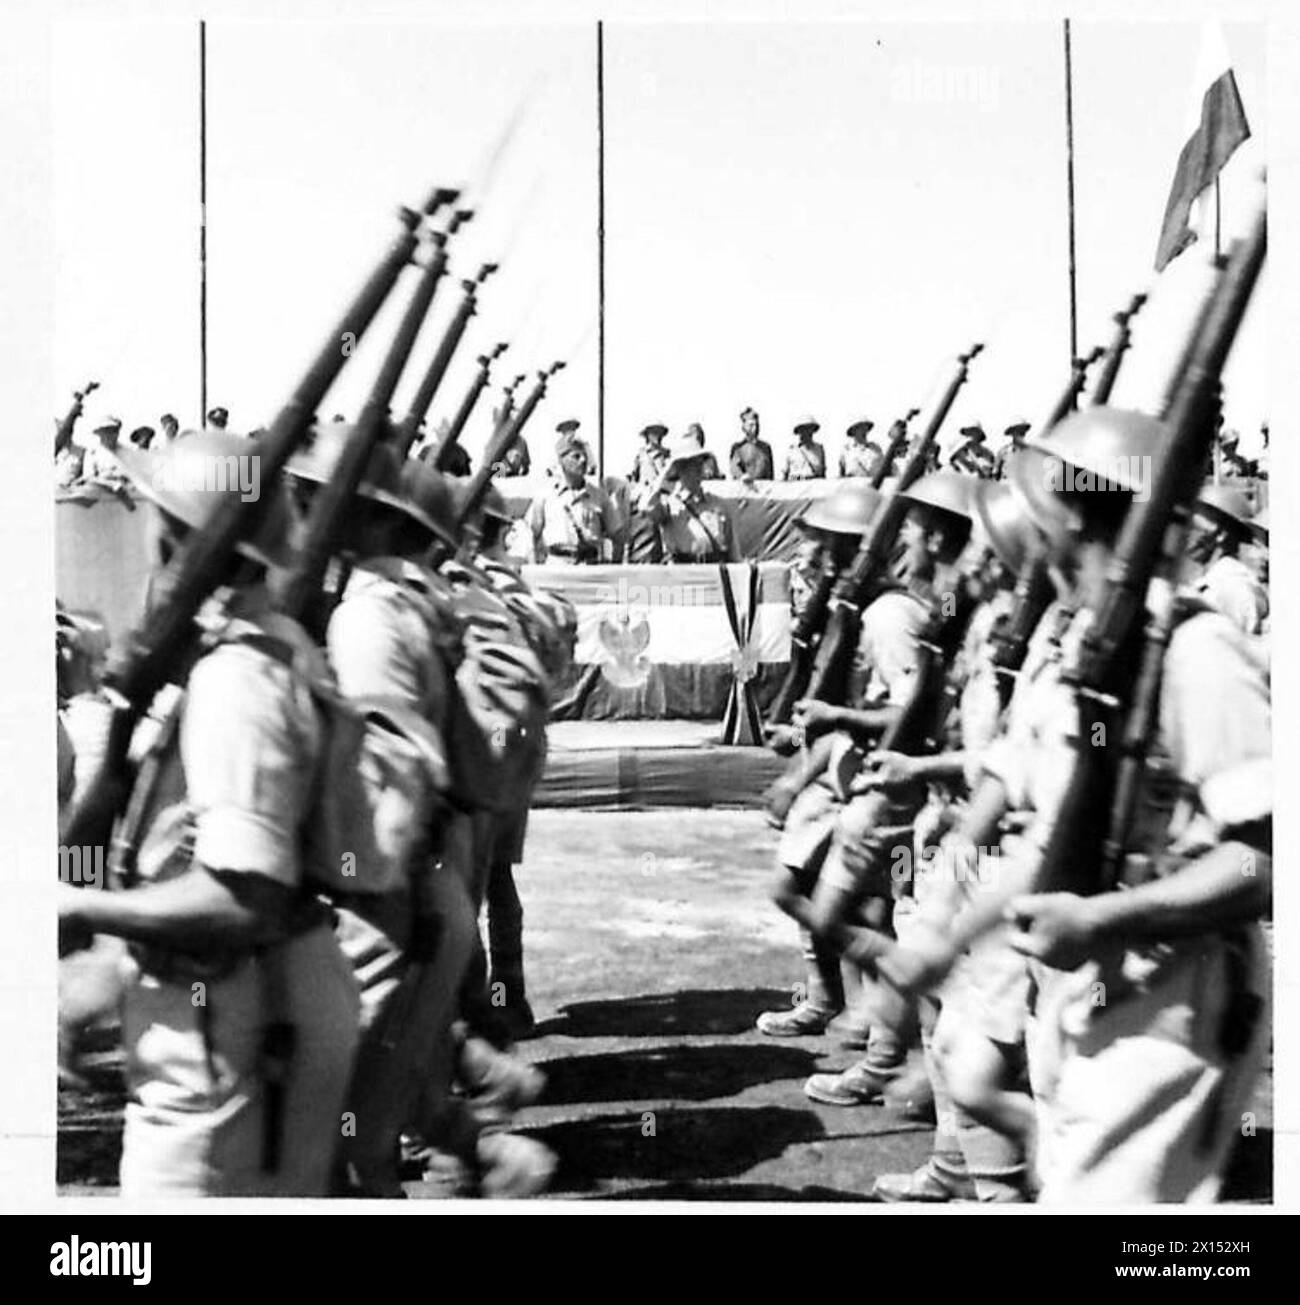 THE POLISH ARMY IN THE MIDDLE EAST, 1942-1943 - General Władysław Sikorski, the Commander-in-Chief of the Polish Armed Forces, taking the salute at the march past of the infantry battalion of the 5th Wilno Infantry Division, an unit of the Polish Army in the East (future 2nd Polish Corps) at their camp around Kirkuk. Photograph taken during General Władysław Sikorski's official tour in Iraq Polish Army, Polish Armed Forces in the West, Polish Corps, II, Polish Armed Forces in the West, Polish Army in the Soviet Union, 5th 'Wilno' Infantry Division, Sikorski, Władysław, Anders, Władysław Stock Photo